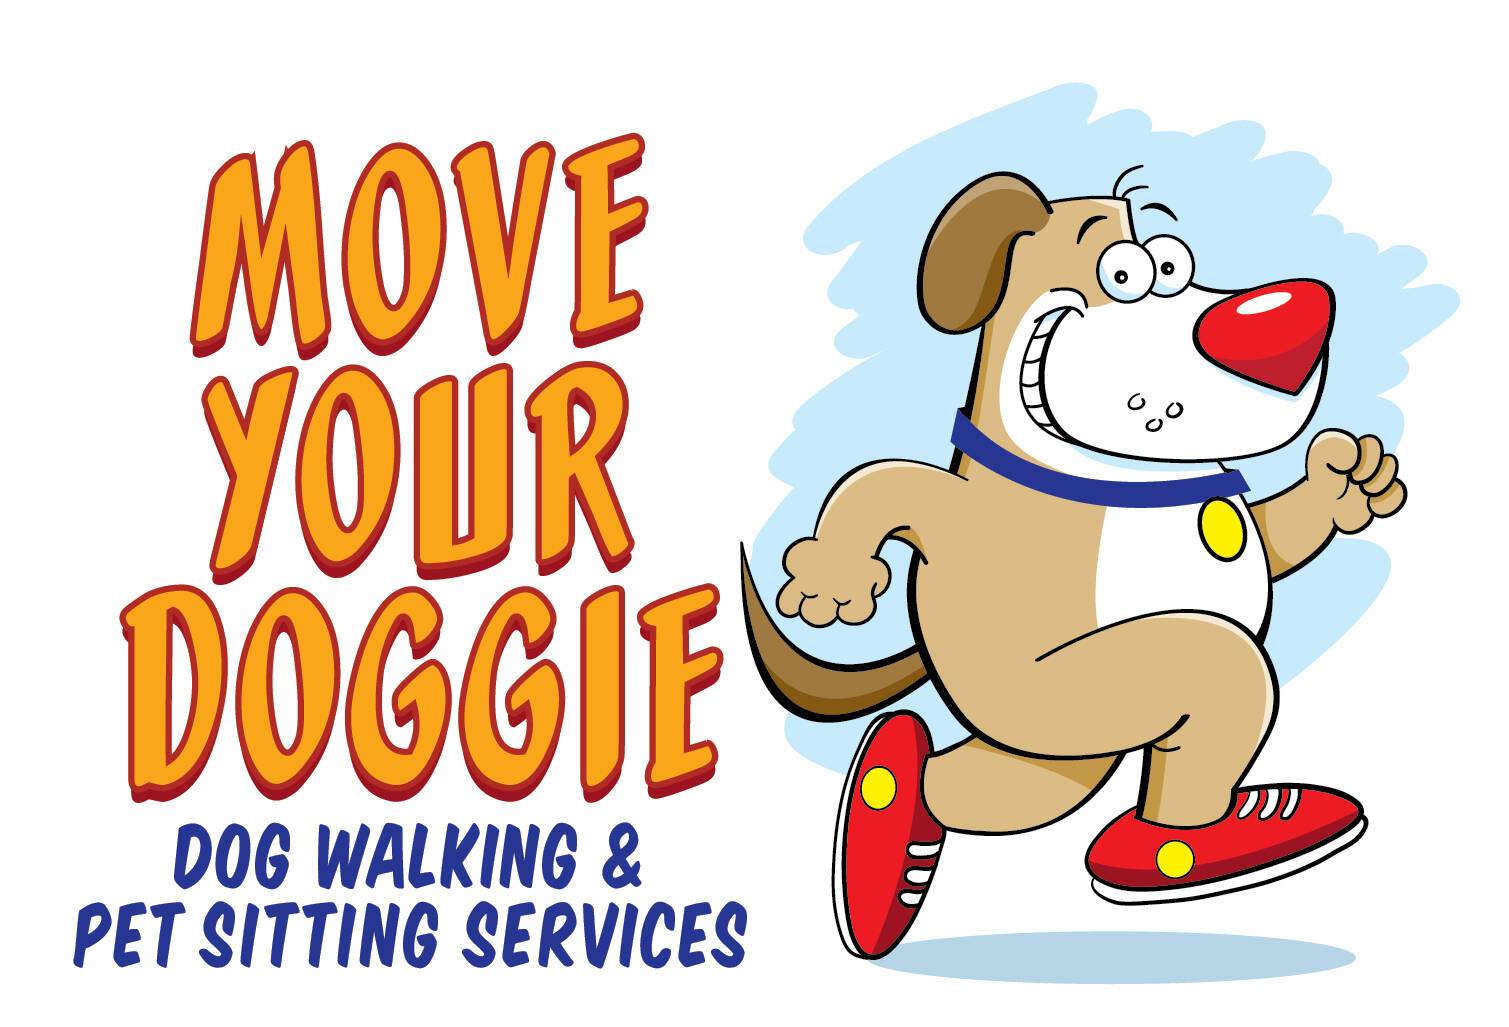 Move Your Doggie